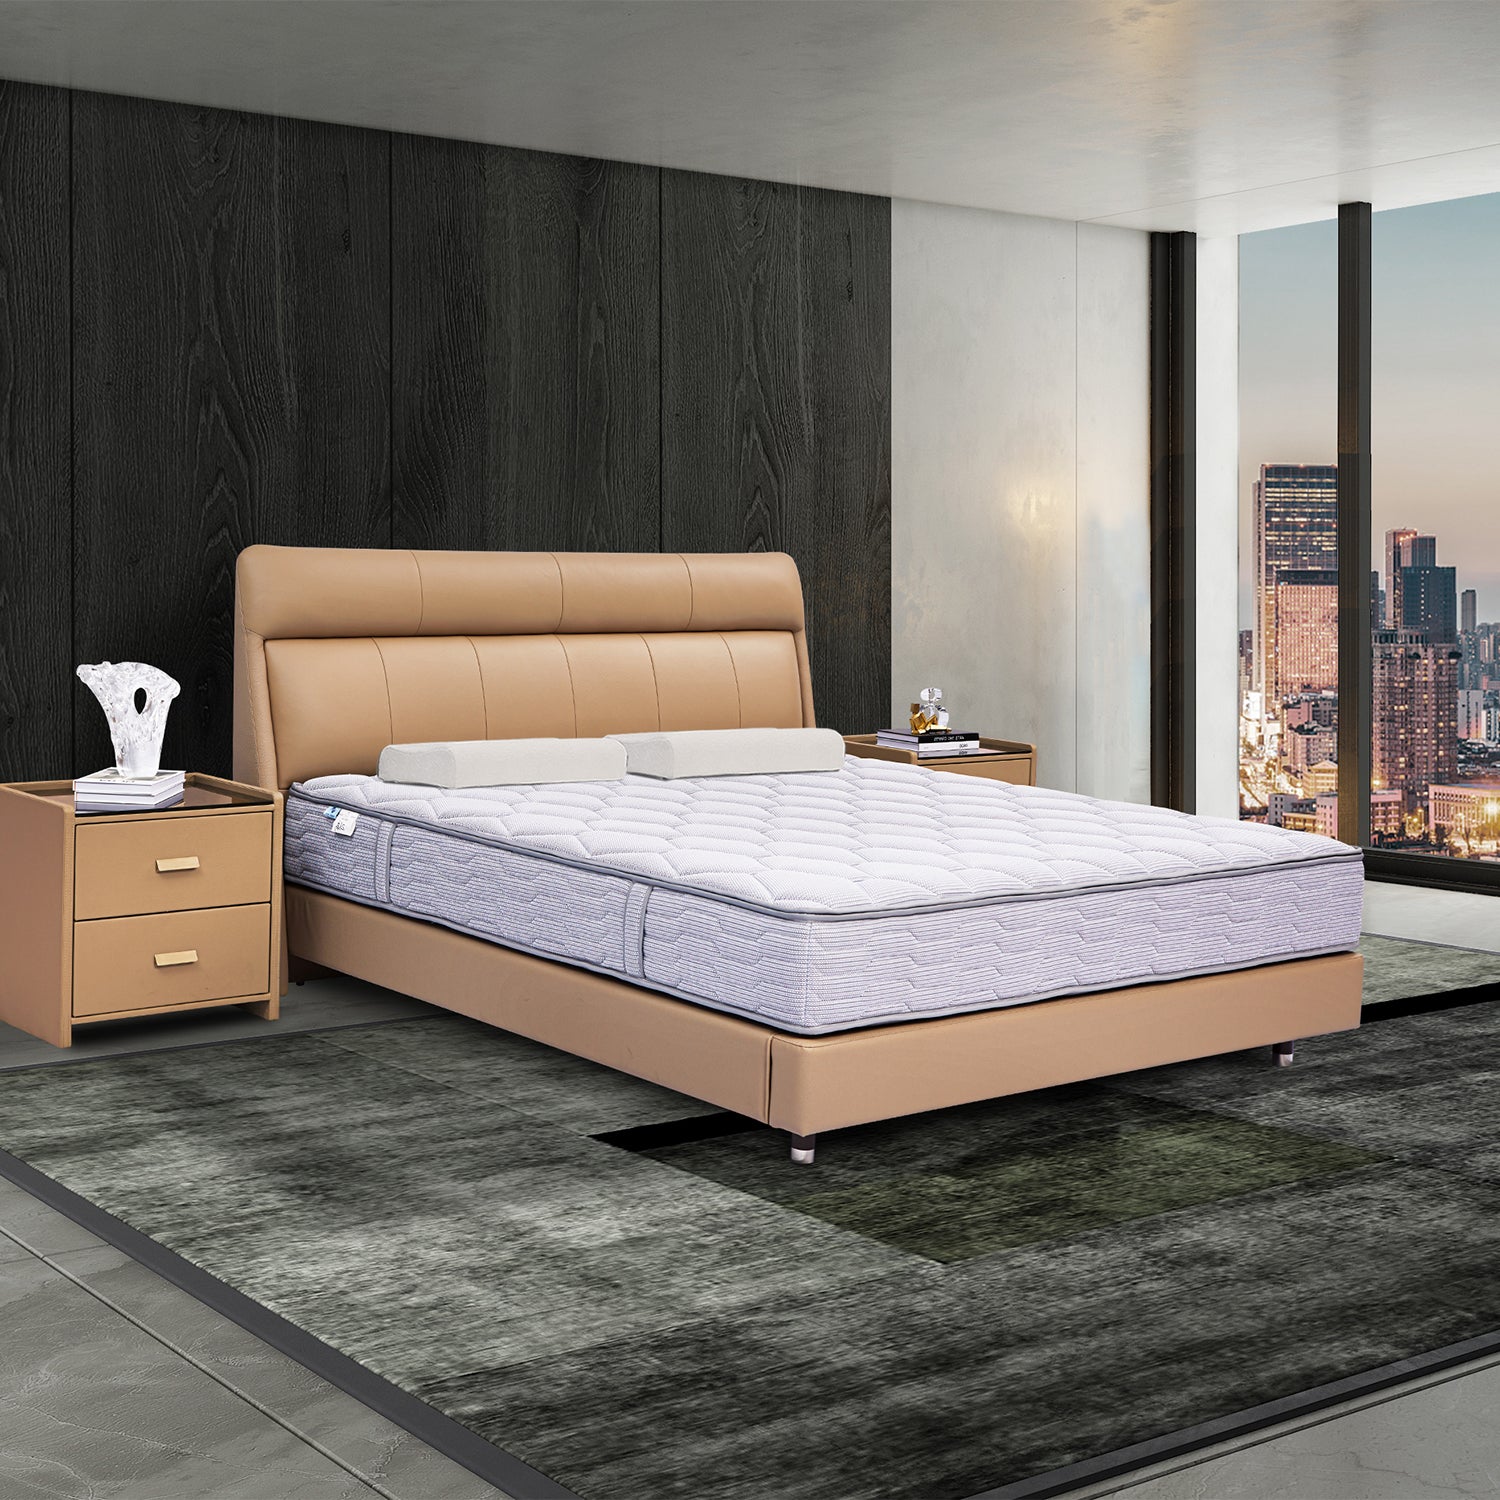 Modern tan leather bed frame BOC1 - 011 by DeRUCCI with white mattress in a stylish bedroom with cityscape window view and bedside tables